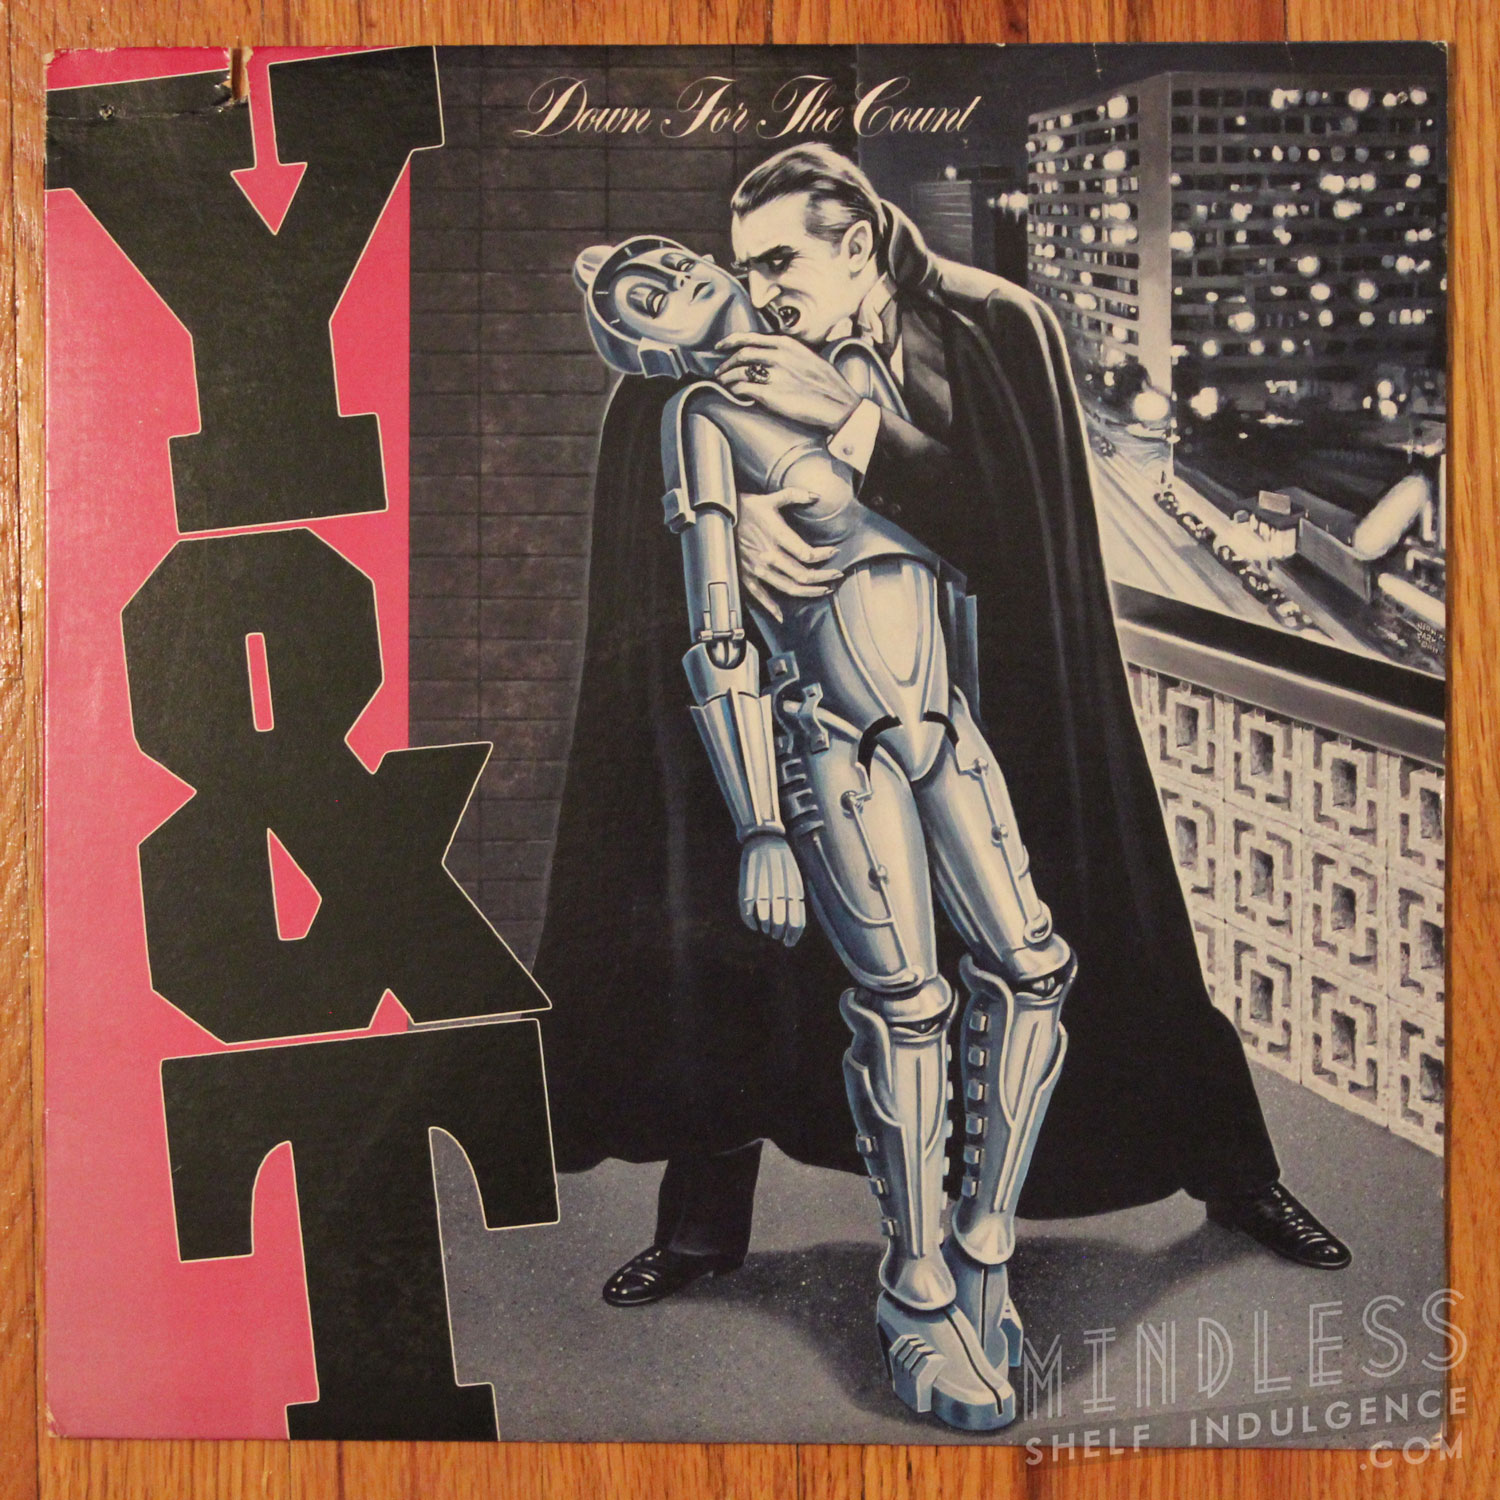 Y&T Down for the Count LP